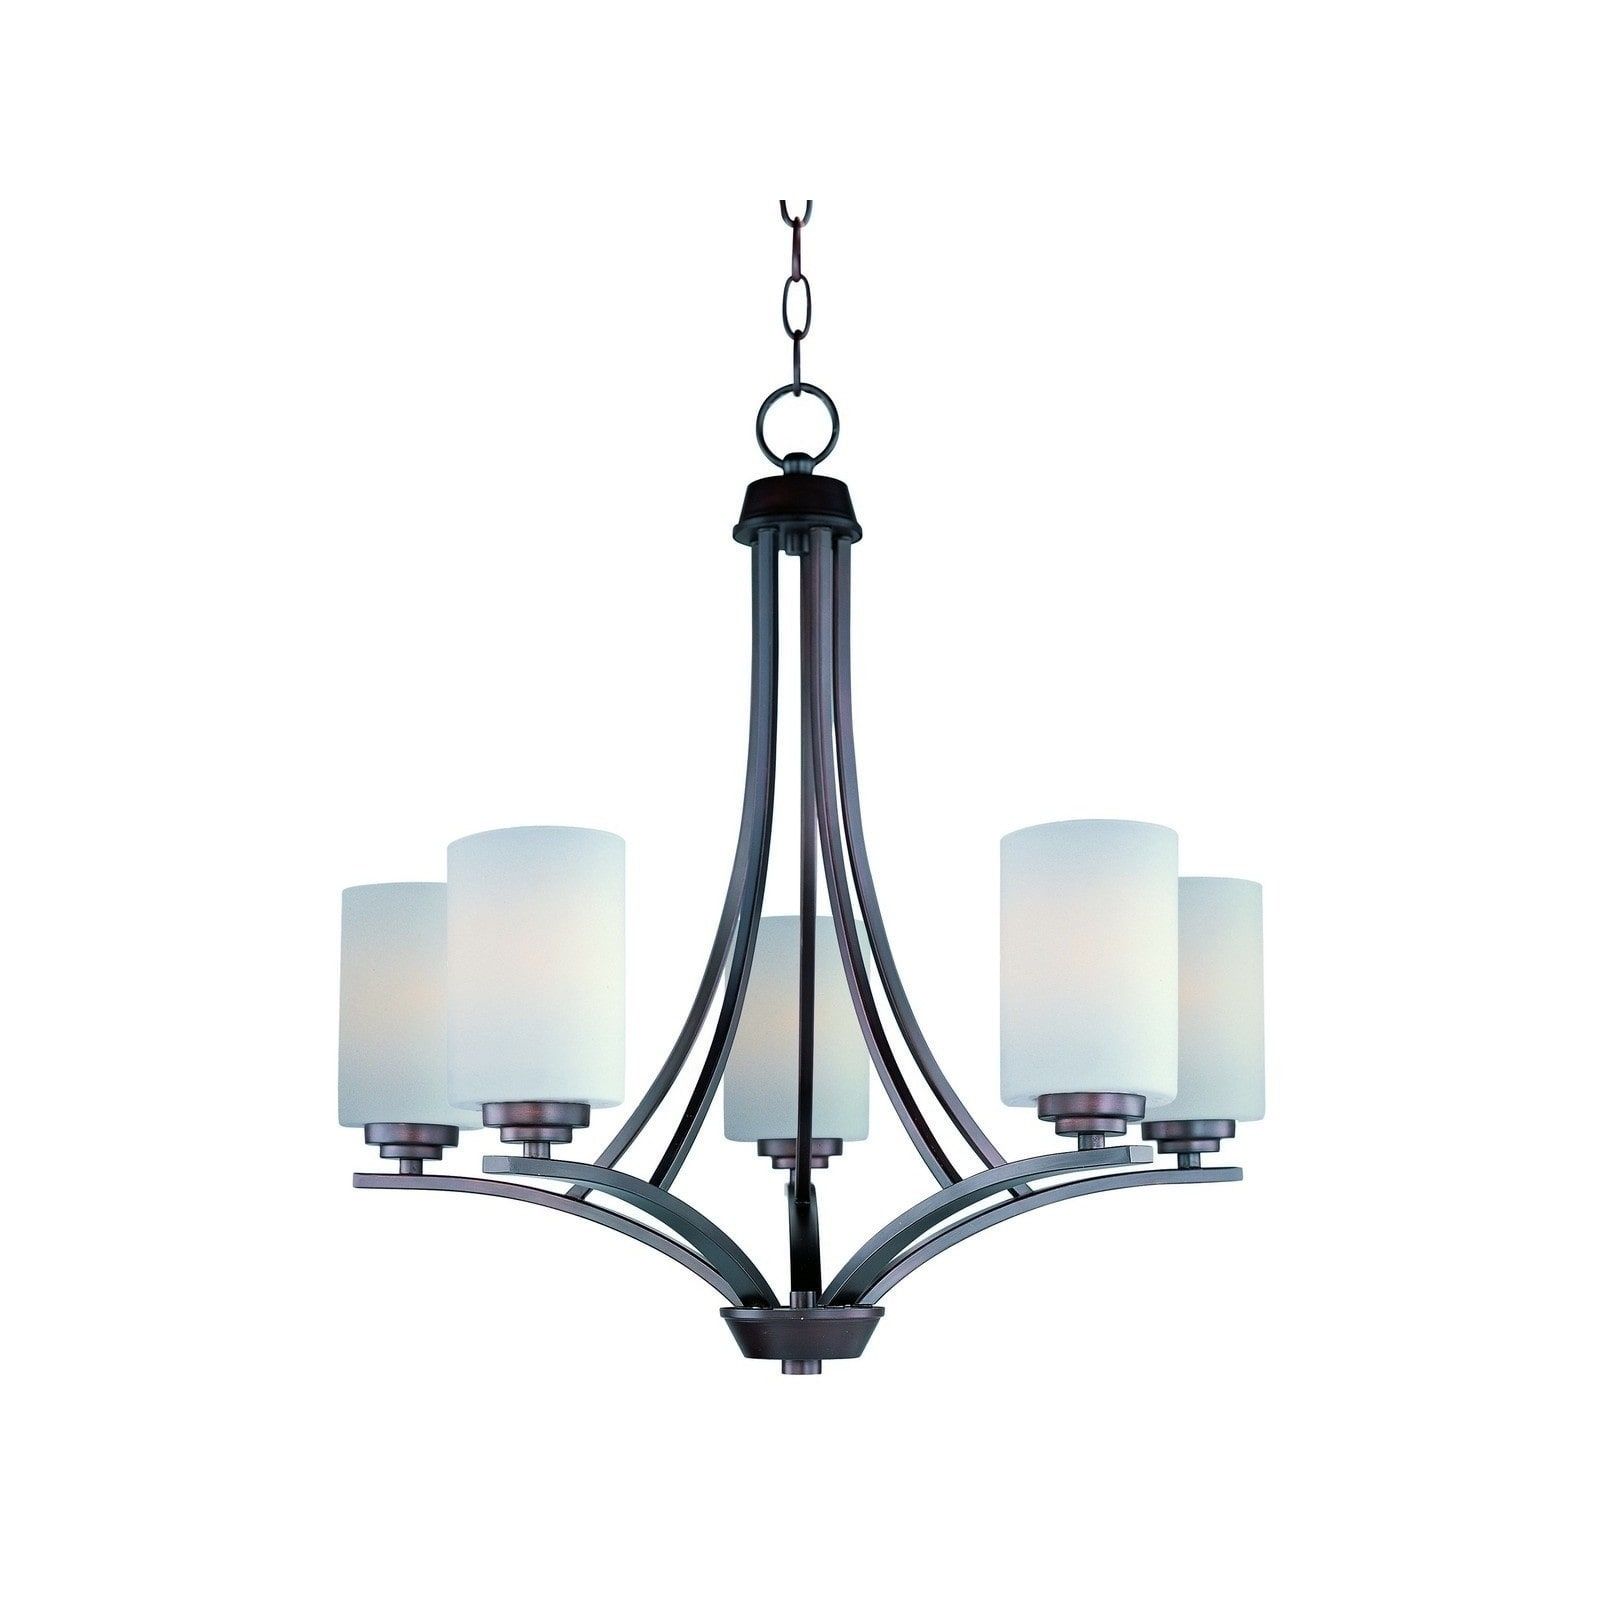 Shop Maxim Satin White Shade 5 Light Bronze Deven Single With Satin Nickel Five Light Single Tier Chandeliers (View 4 of 15)